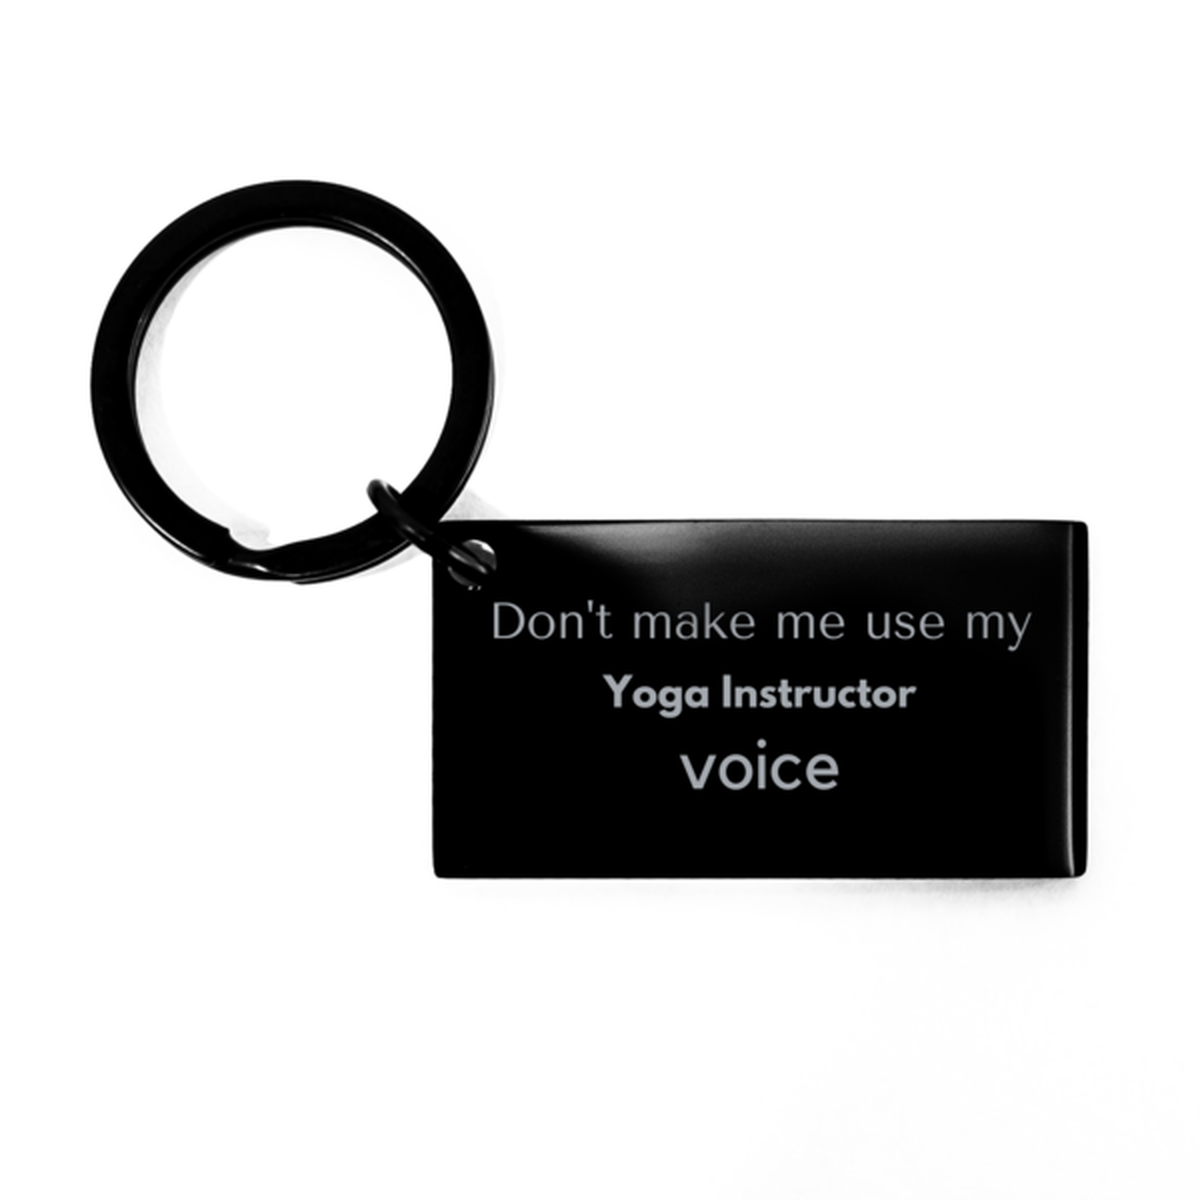 Don't make me use my Yoga Instructor voice, Sarcasm Yoga Instructor Gifts, Christmas Yoga Instructor Keychain Birthday Unique Gifts For Yoga Instructor Coworkers, Men, Women, Colleague, Friends